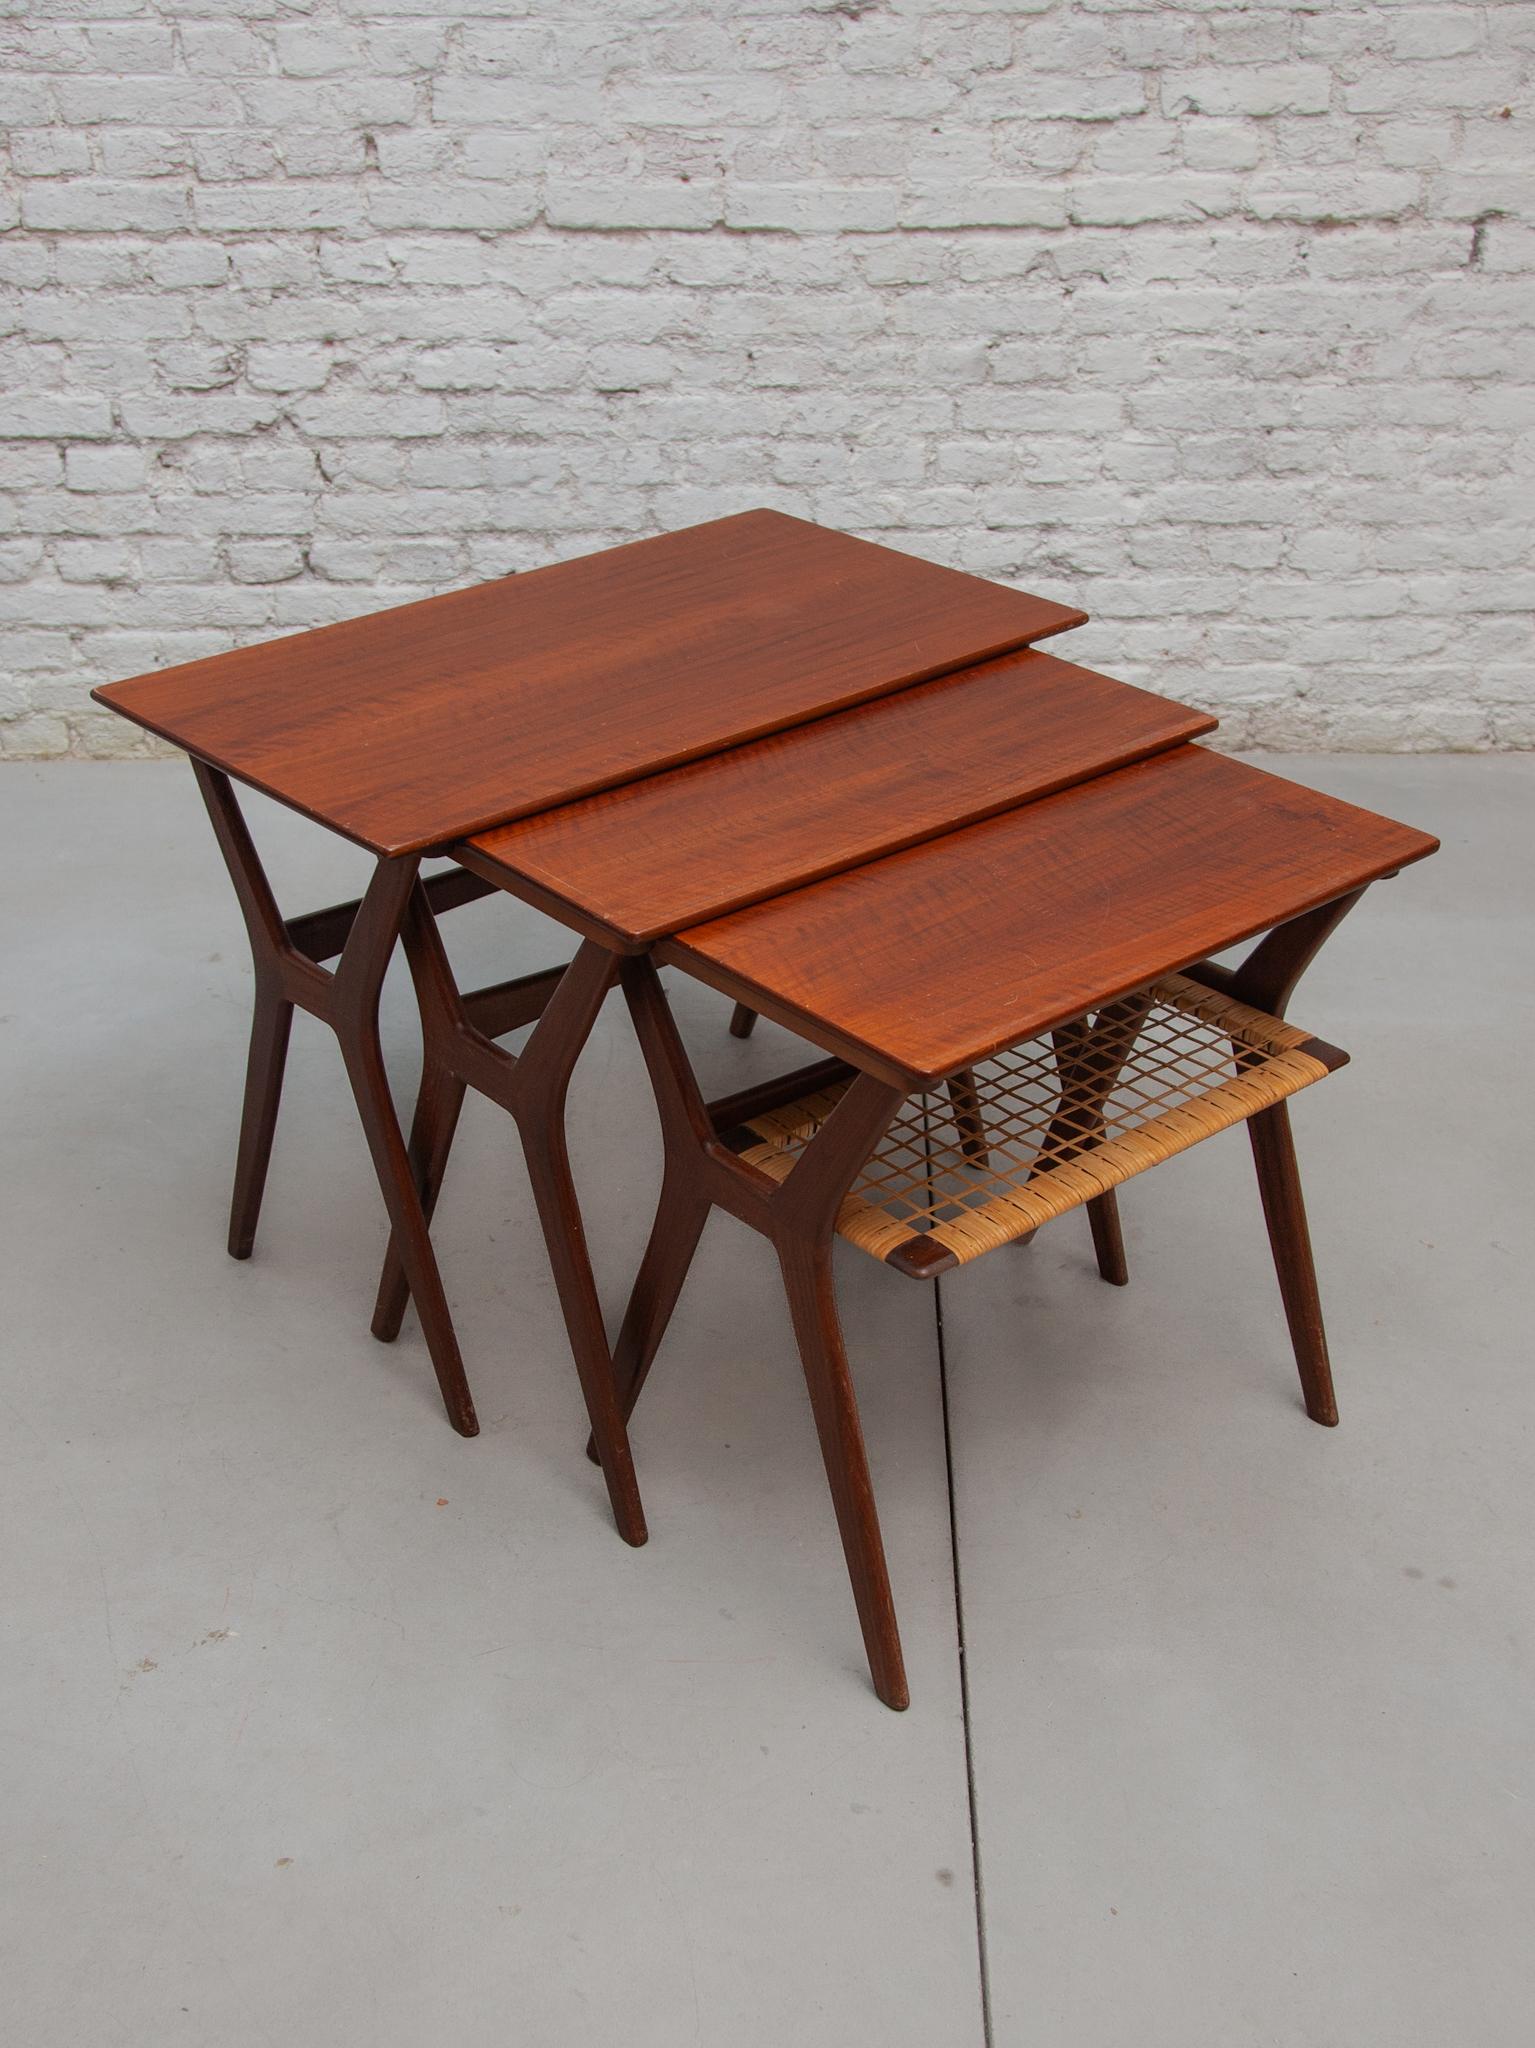 Mid-century teak nesting tables perfectly slide into each other forming a beautiful nest of tables. The lowest table has a cane webbing lower tier. In perfect good condition.Designed by Johannes Andersen for Silkeborg, 1960s Denmark. Dimensions: